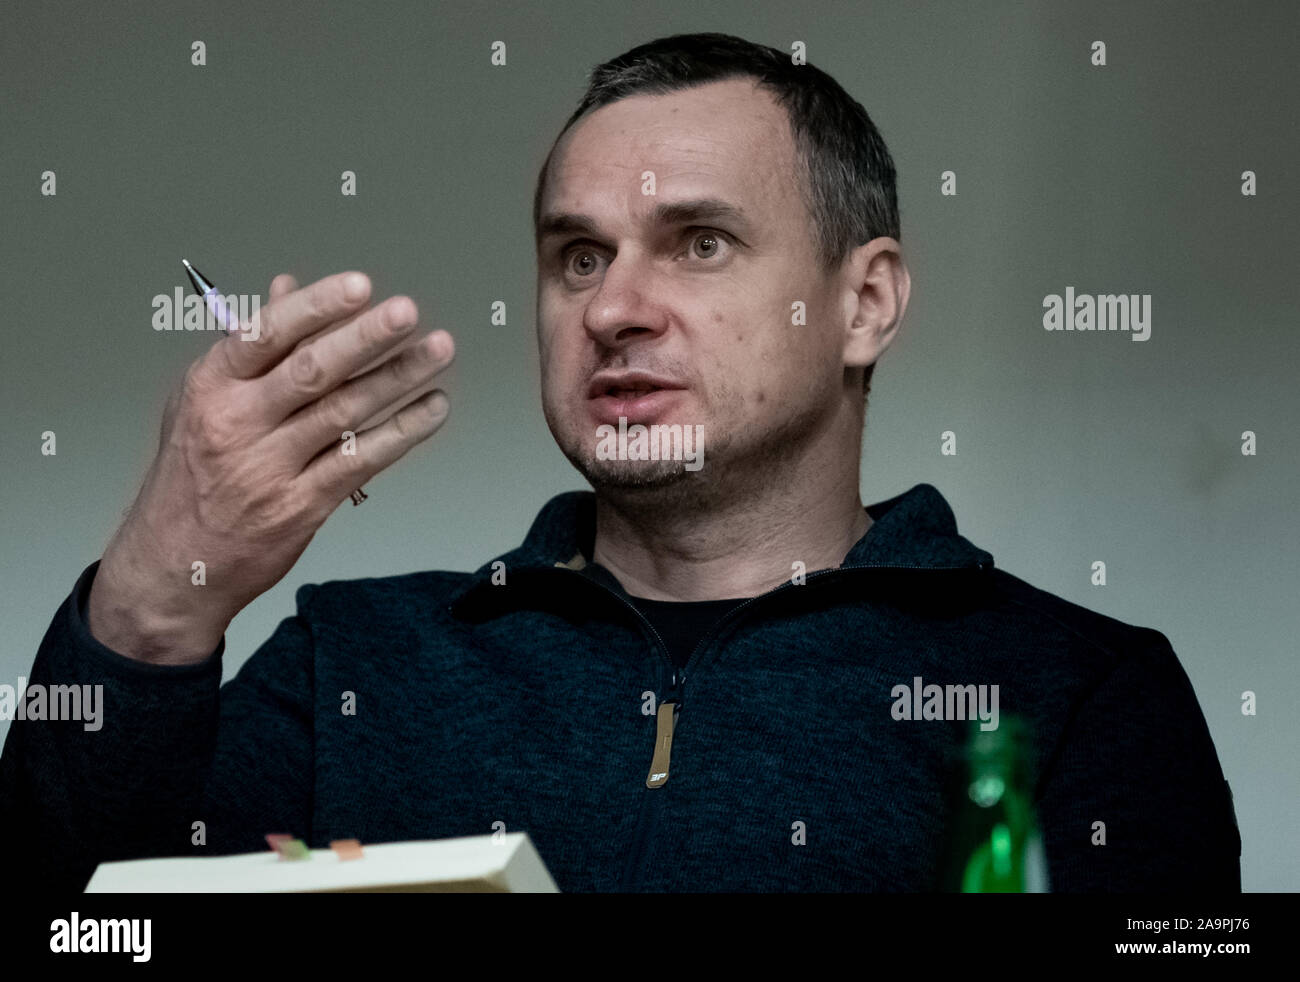 London, UK. 16th November, 2019. Oleg Sentsov speaks and signs copies of his book 'The Marketeer' at the Ukrainian Cultural Centre. Sentsov is a Ukrainian filmmaker, writer and activist from Crimea. Following the Russian annexation of Crimea in 2014 he was arrested in Crimea and sentenced to 20 years' imprisonment by a Russian court on charges of plotting terrorism acts. The conviction was described as fabricated by Amnesty International and others. He was awarded the European Parliament’s Sakharov Prize in 2018. He was released in a prisoner swap. Credit: Guy Corbishley/Alamy Live News Stock Photo